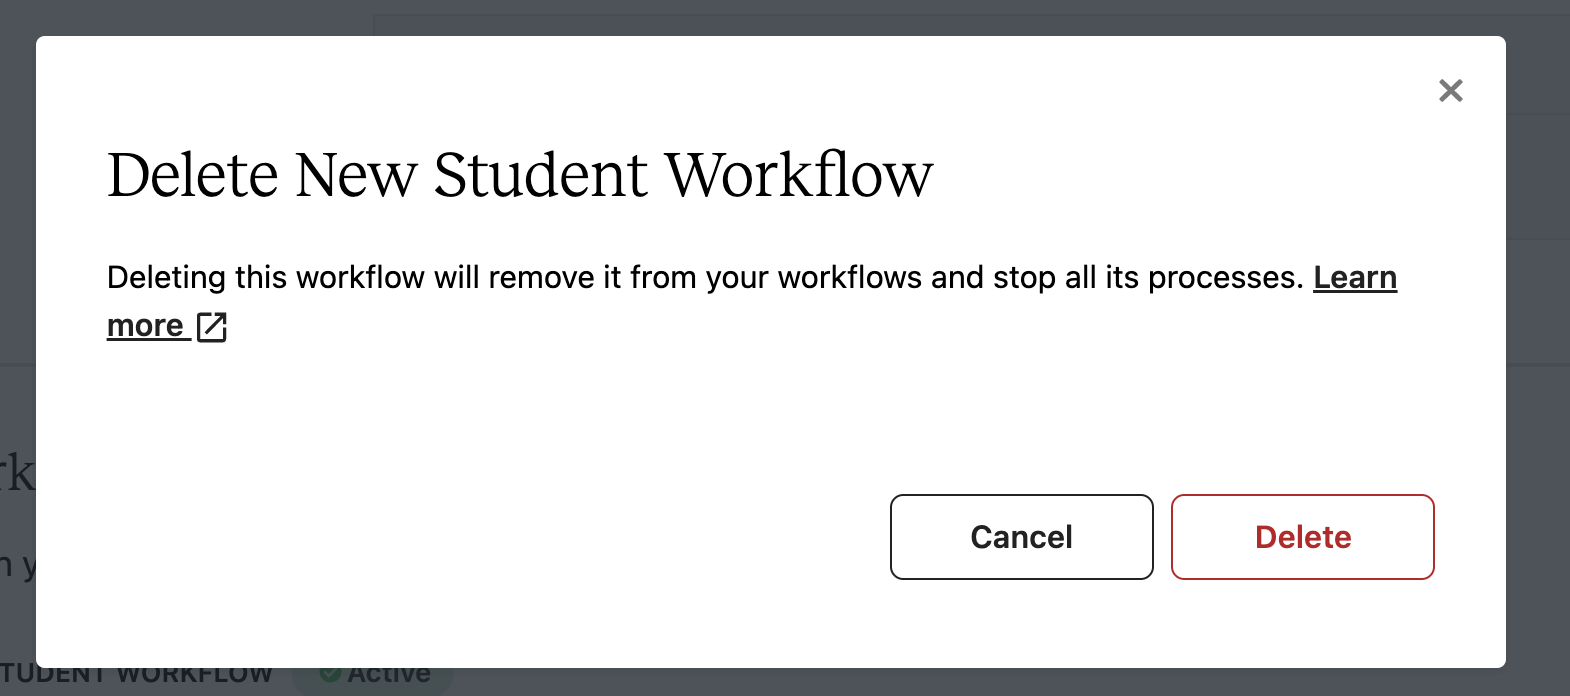 aweber_confirm_delete_workflow.png